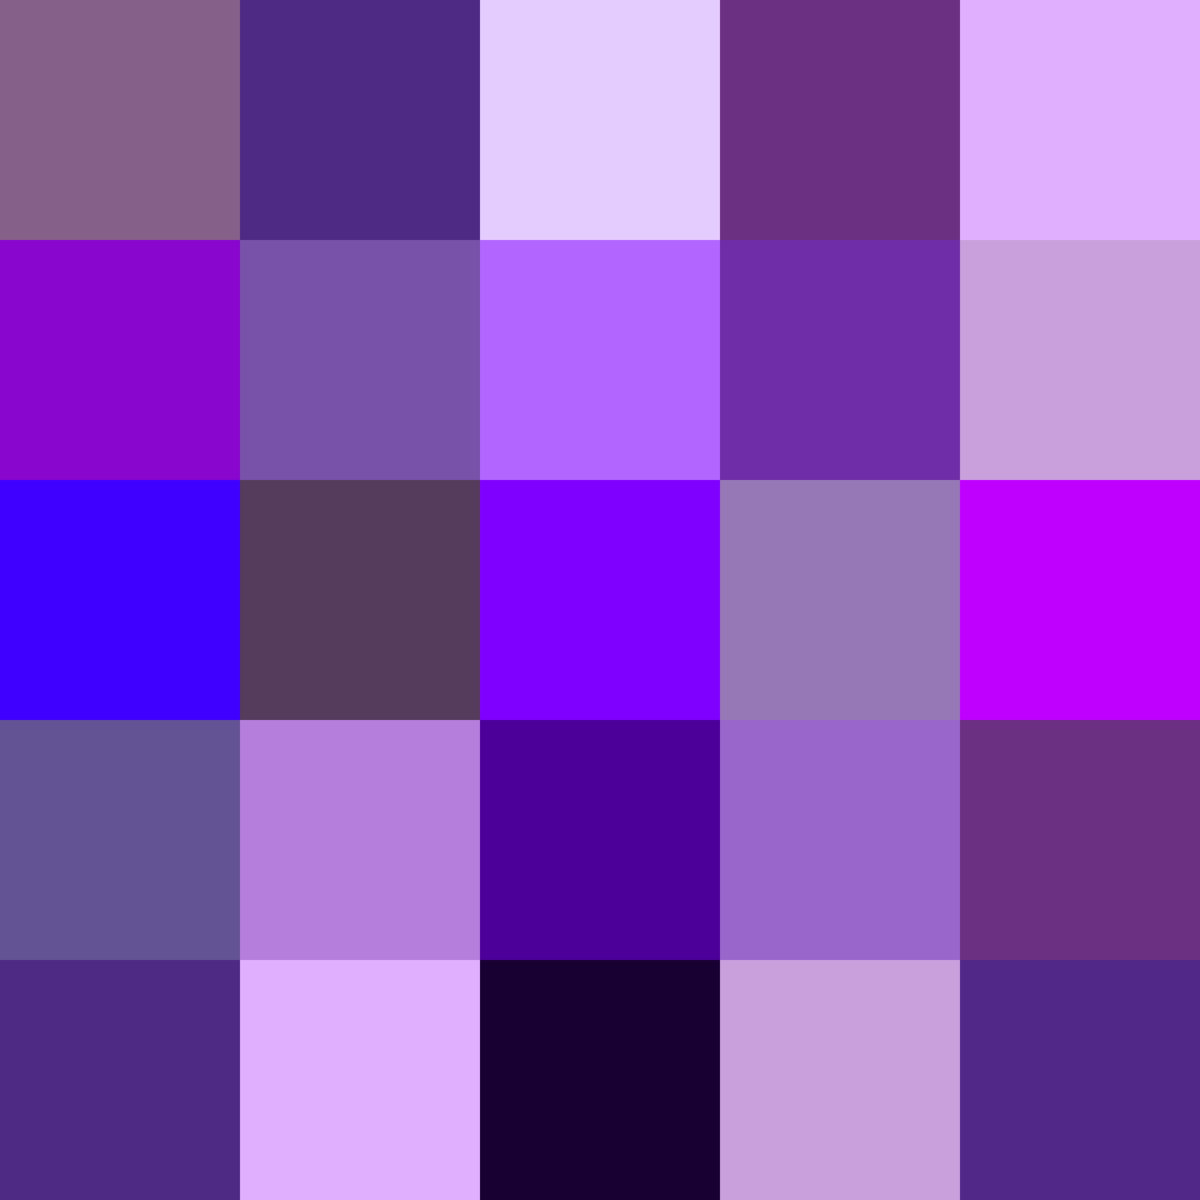 Shades of violet - Wikipedia